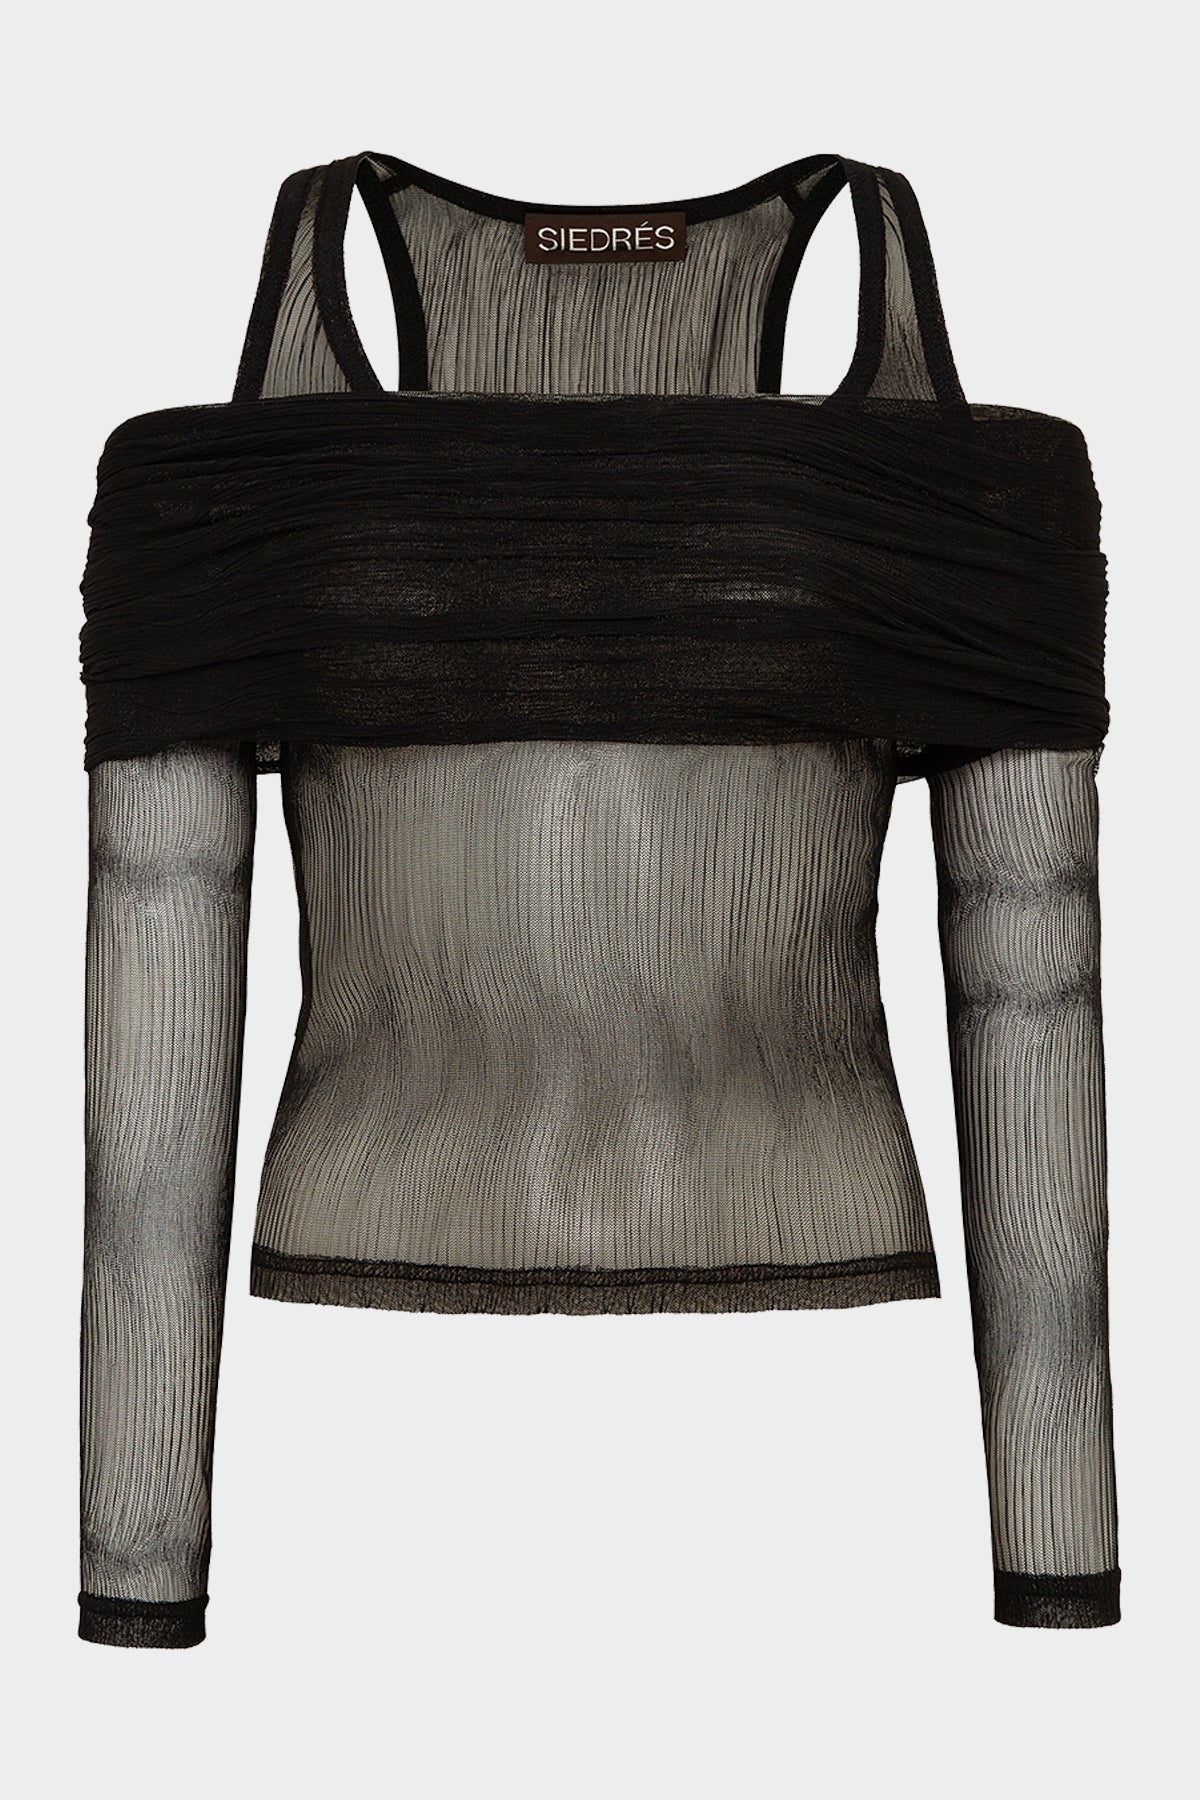 Lille Layered Long-Sleeve Sheer Top in Black - shop-olivia.com